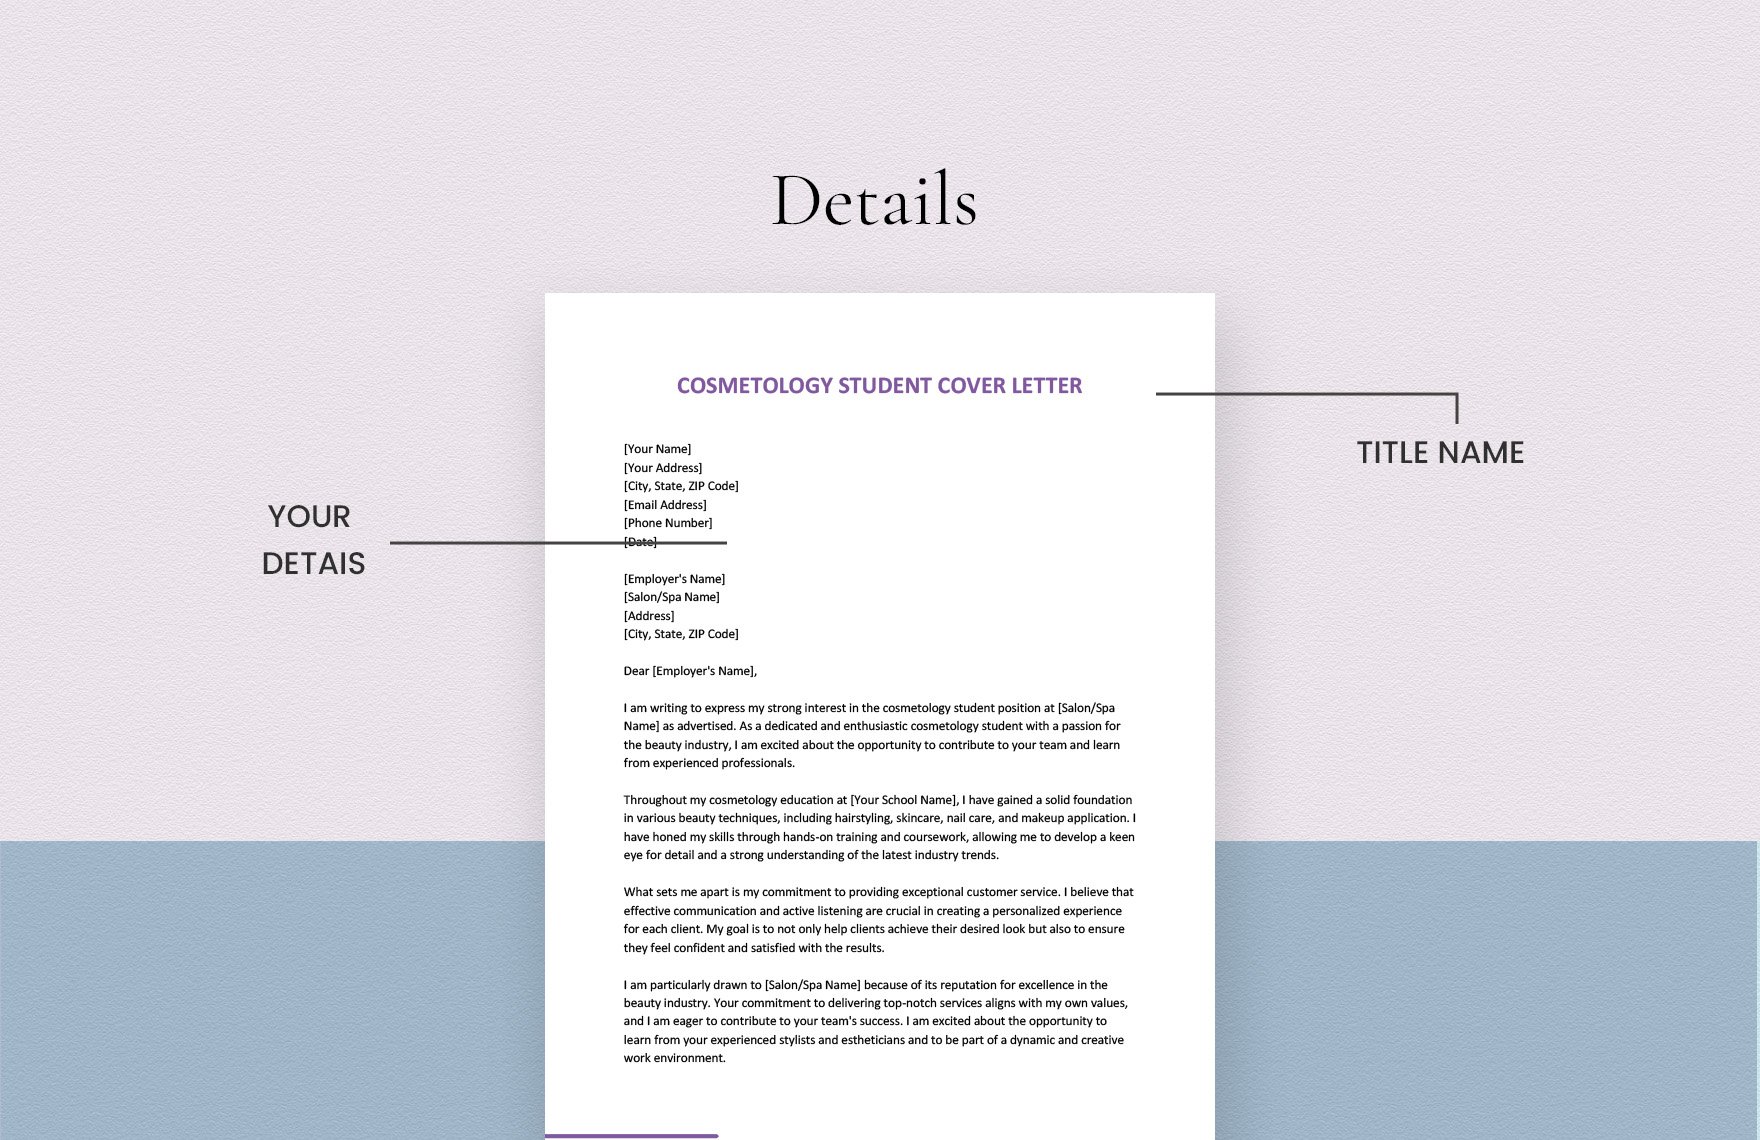 Cosmetology Student Cover Letter in Word, Google Docs - Download ...